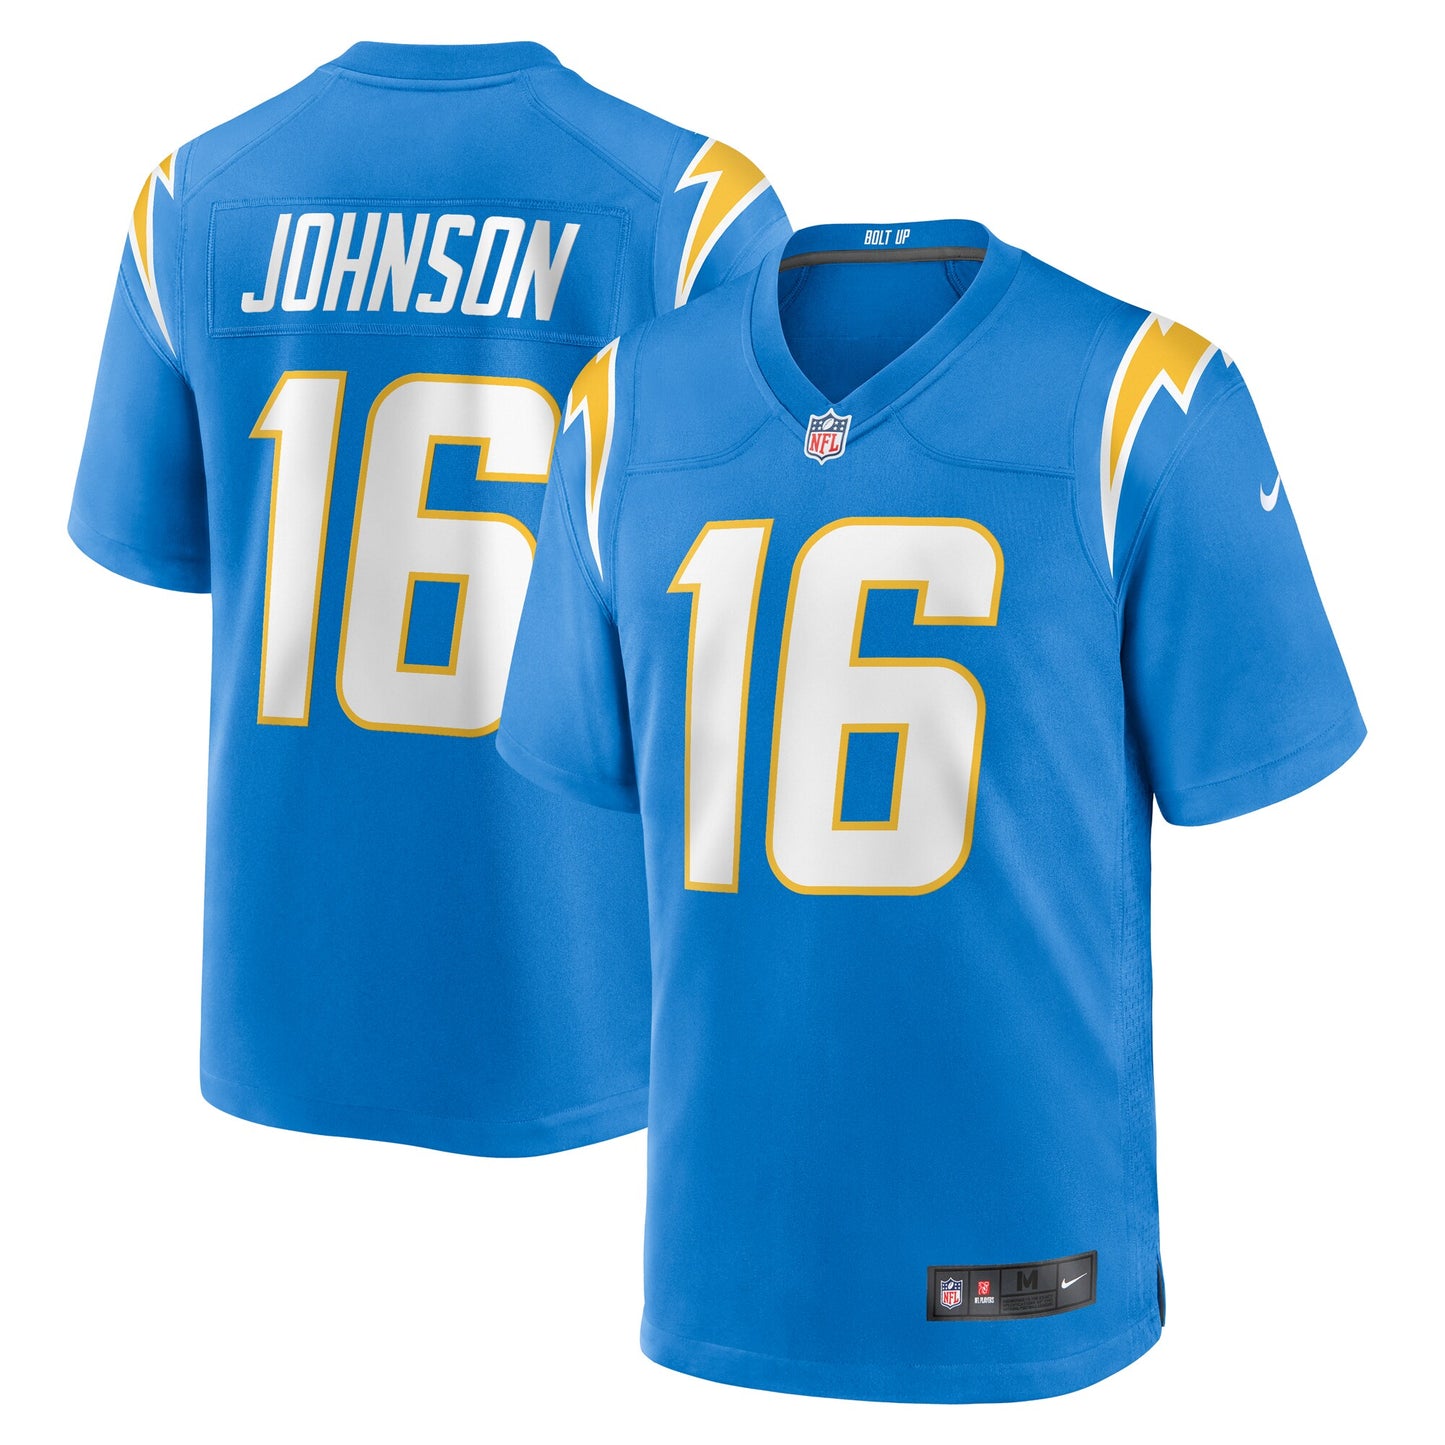 Tyler Johnson Los Angeles Chargers Nike Team Game Jersey - Powder Blue